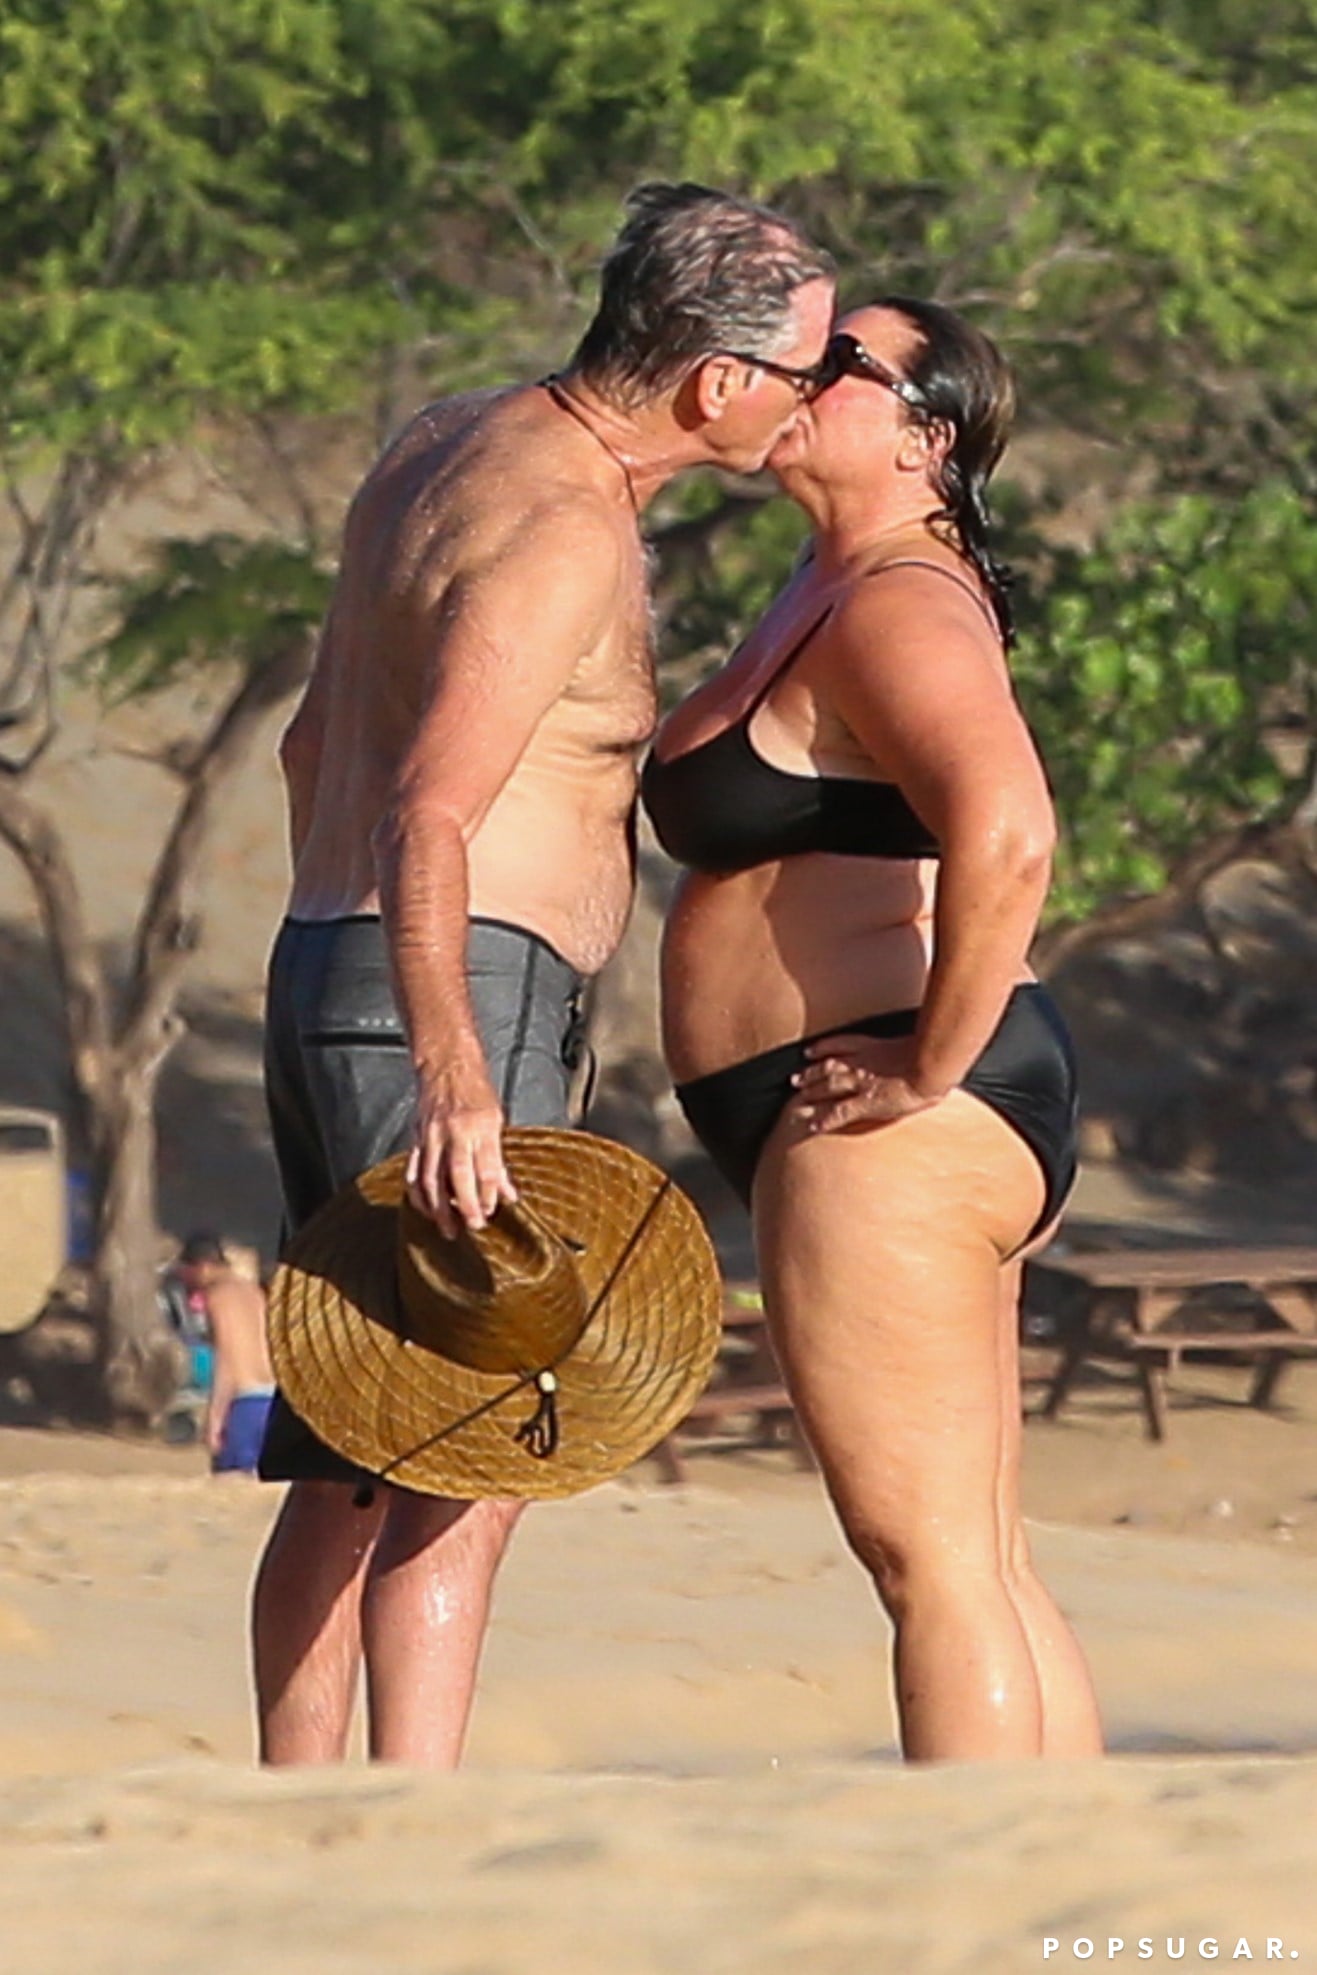 Pierce Brosnan Gives Himself the Best Birthday Gift by Making Out With His Wife...